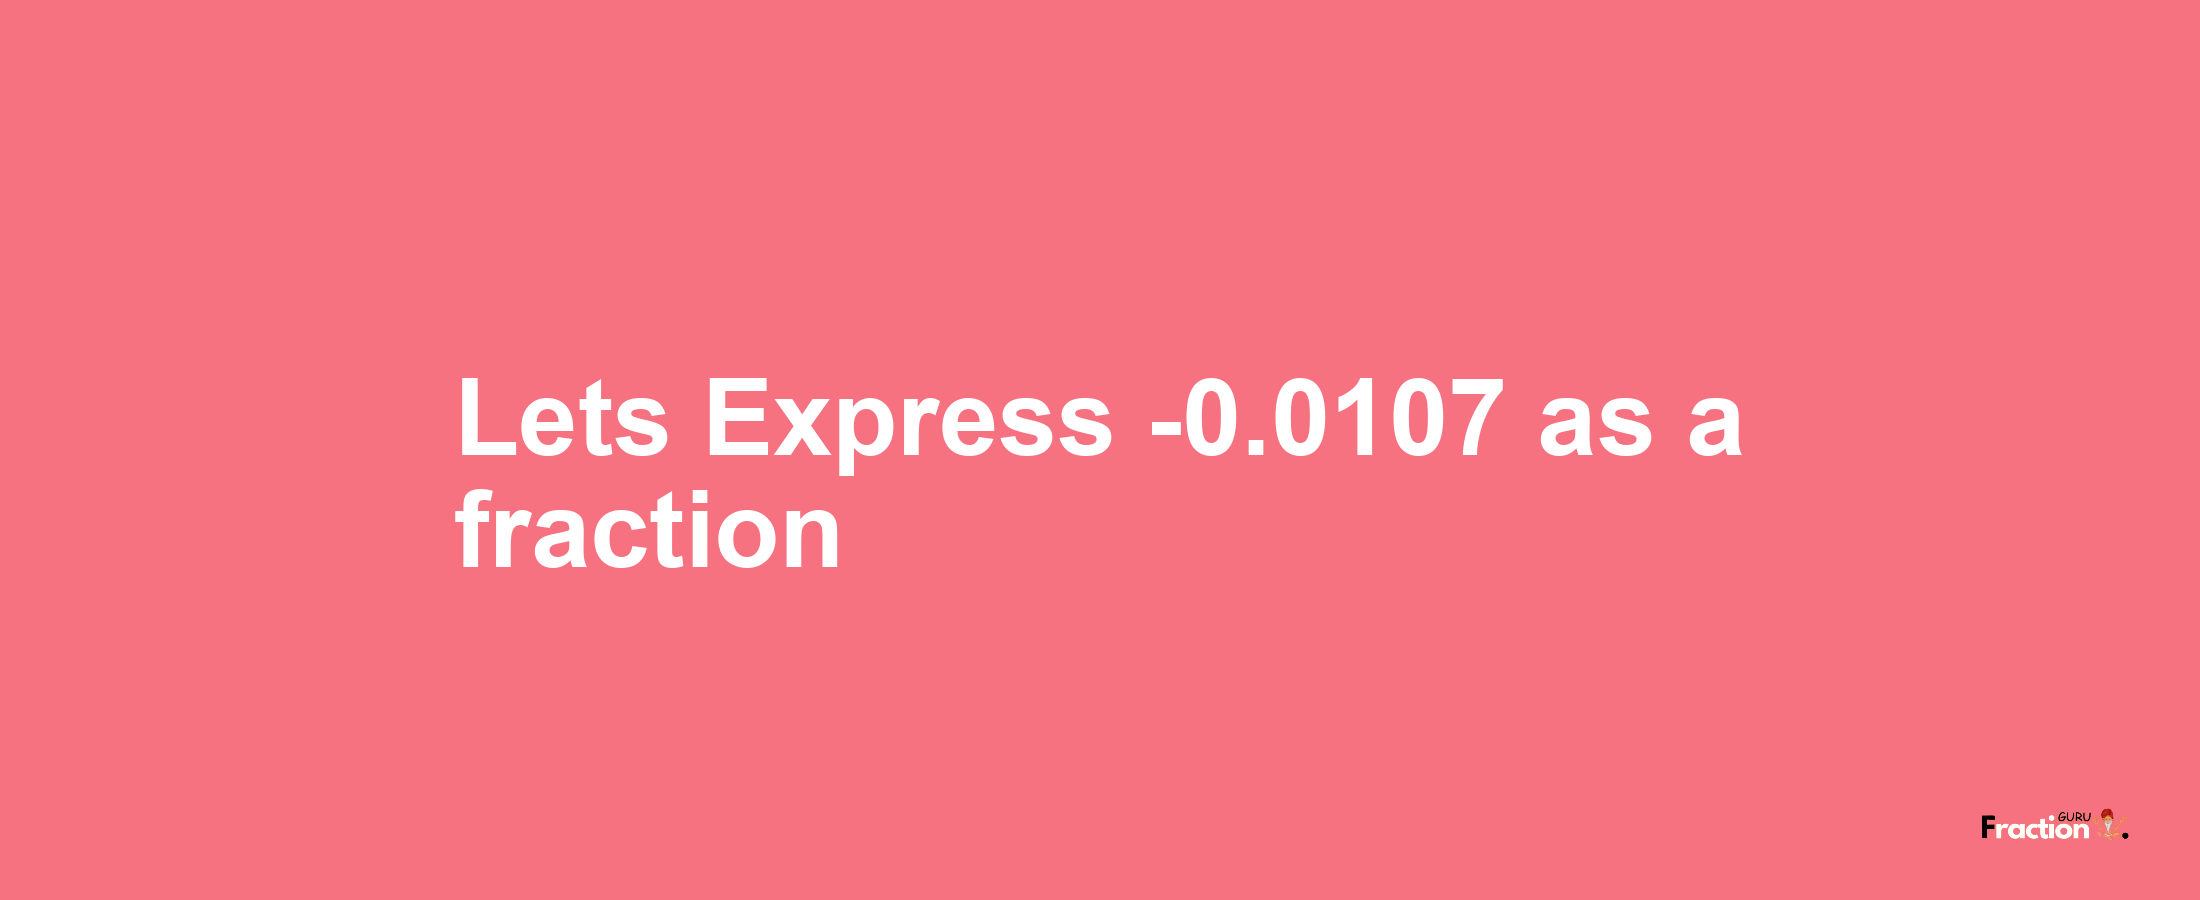 Lets Express -0.0107 as afraction